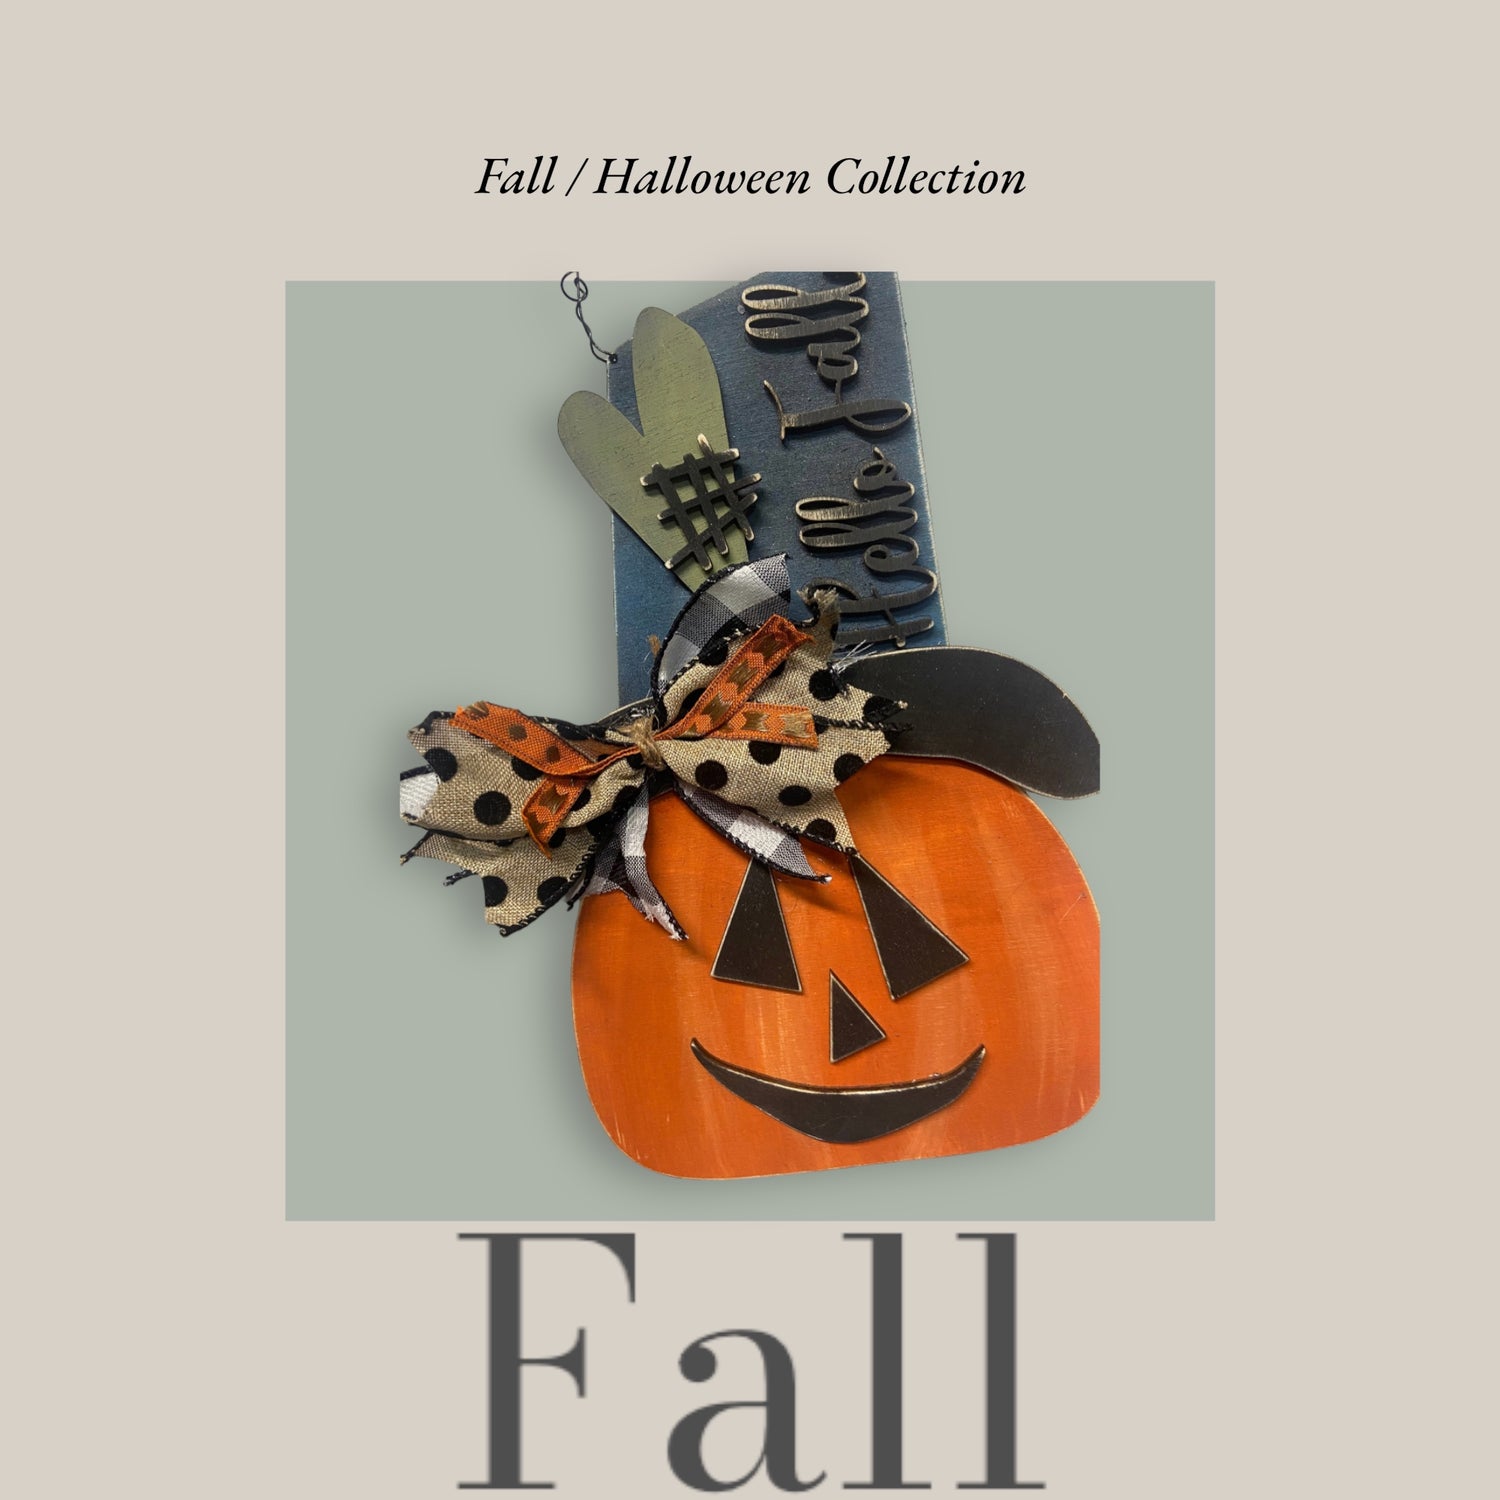 Fall / Halloween Collection